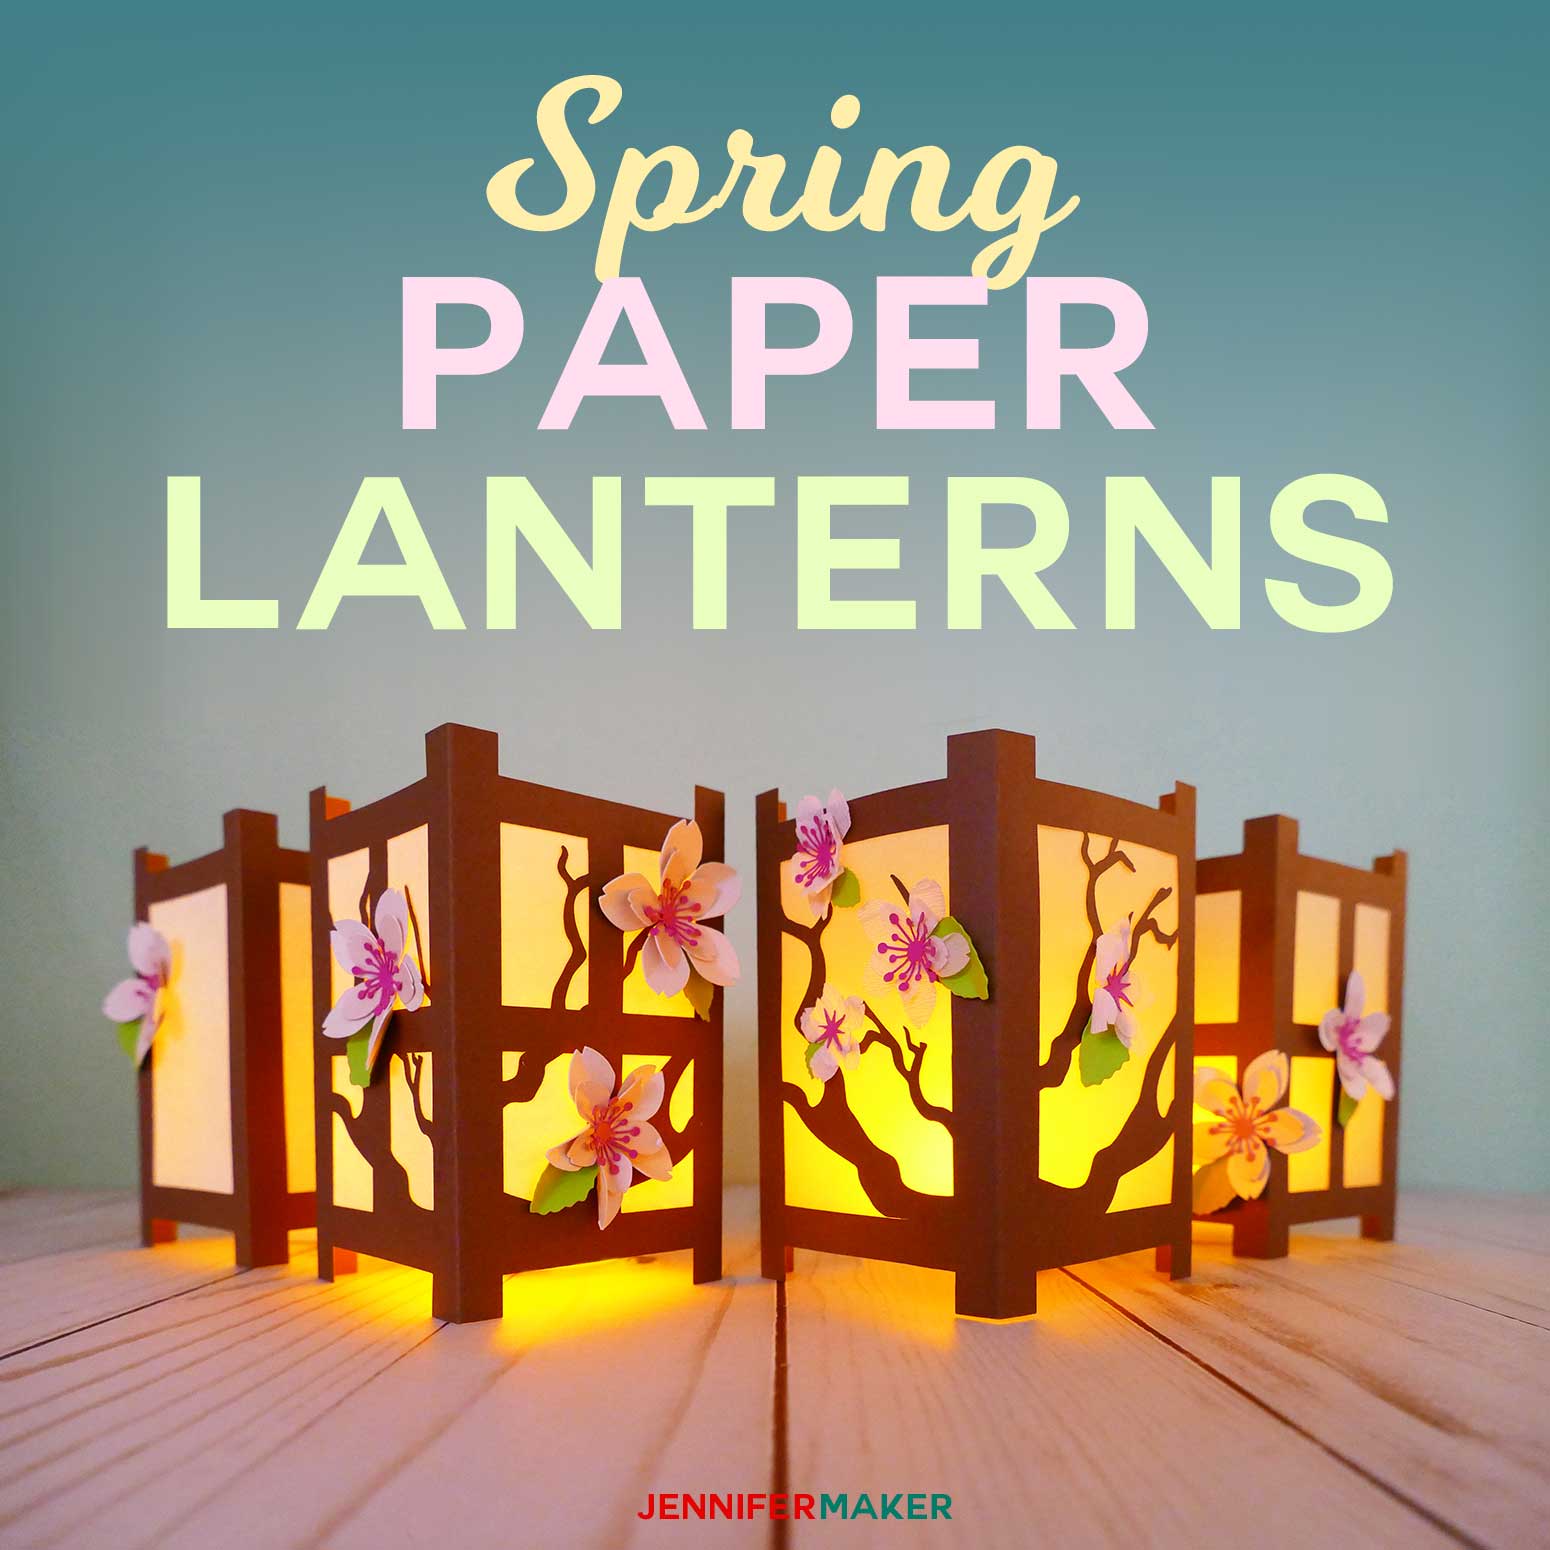 Japanese Paper Lanterns with Spring Flowers